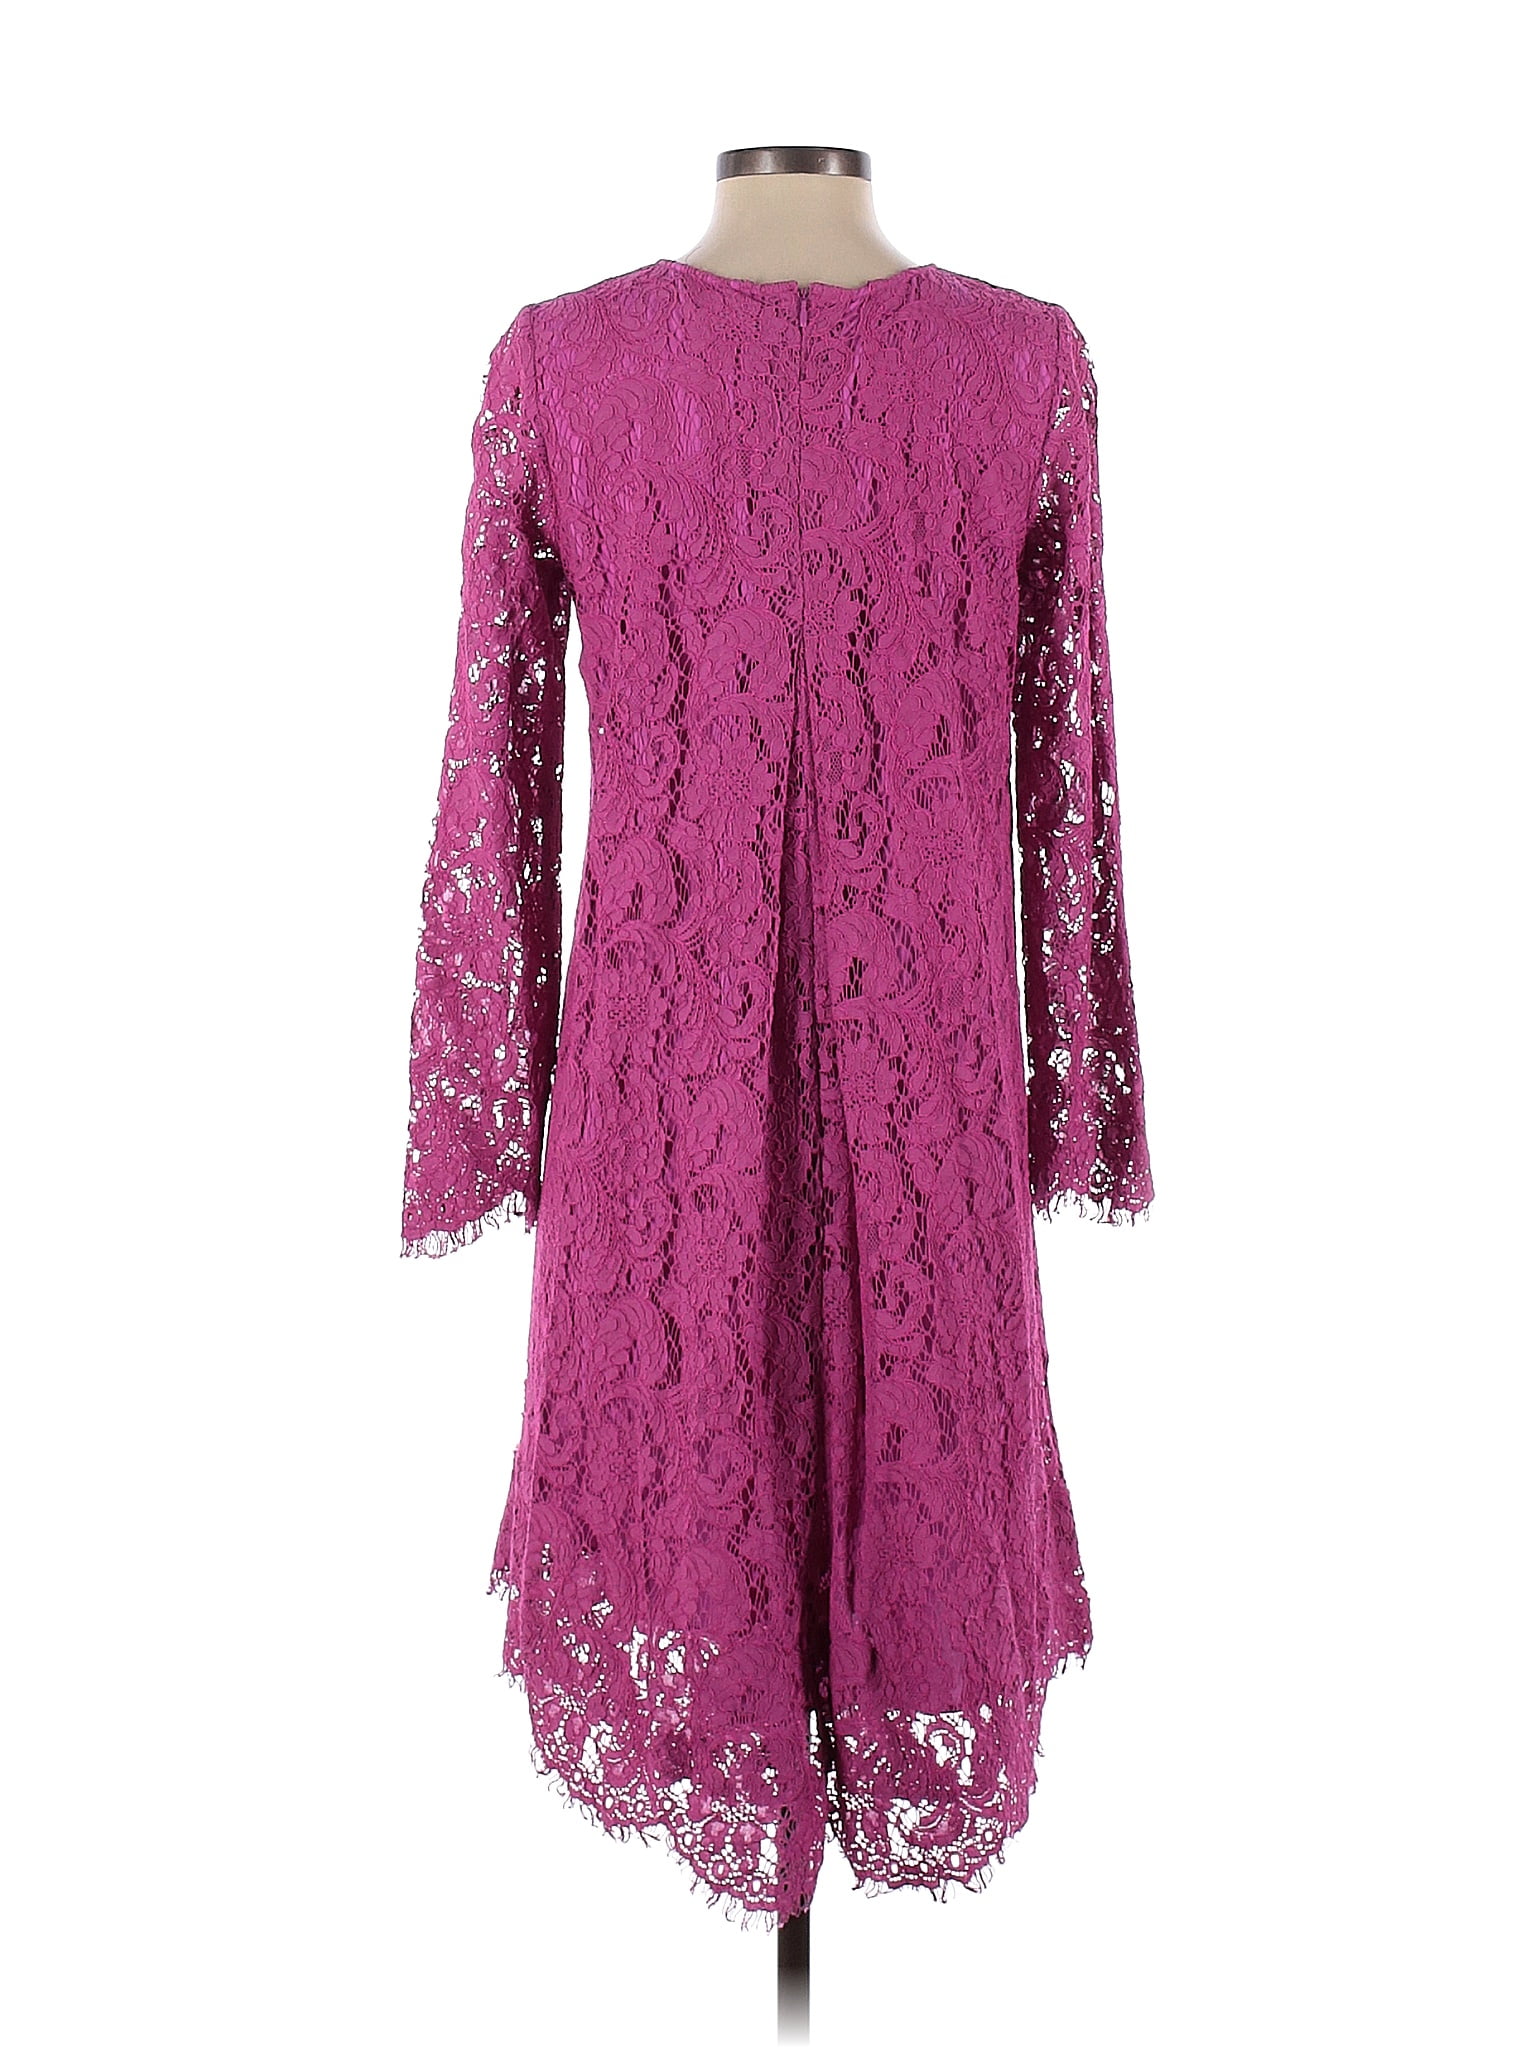 Adam Lippes Collective Solid Pink Long Sleeve Trapeze Dress Size 4